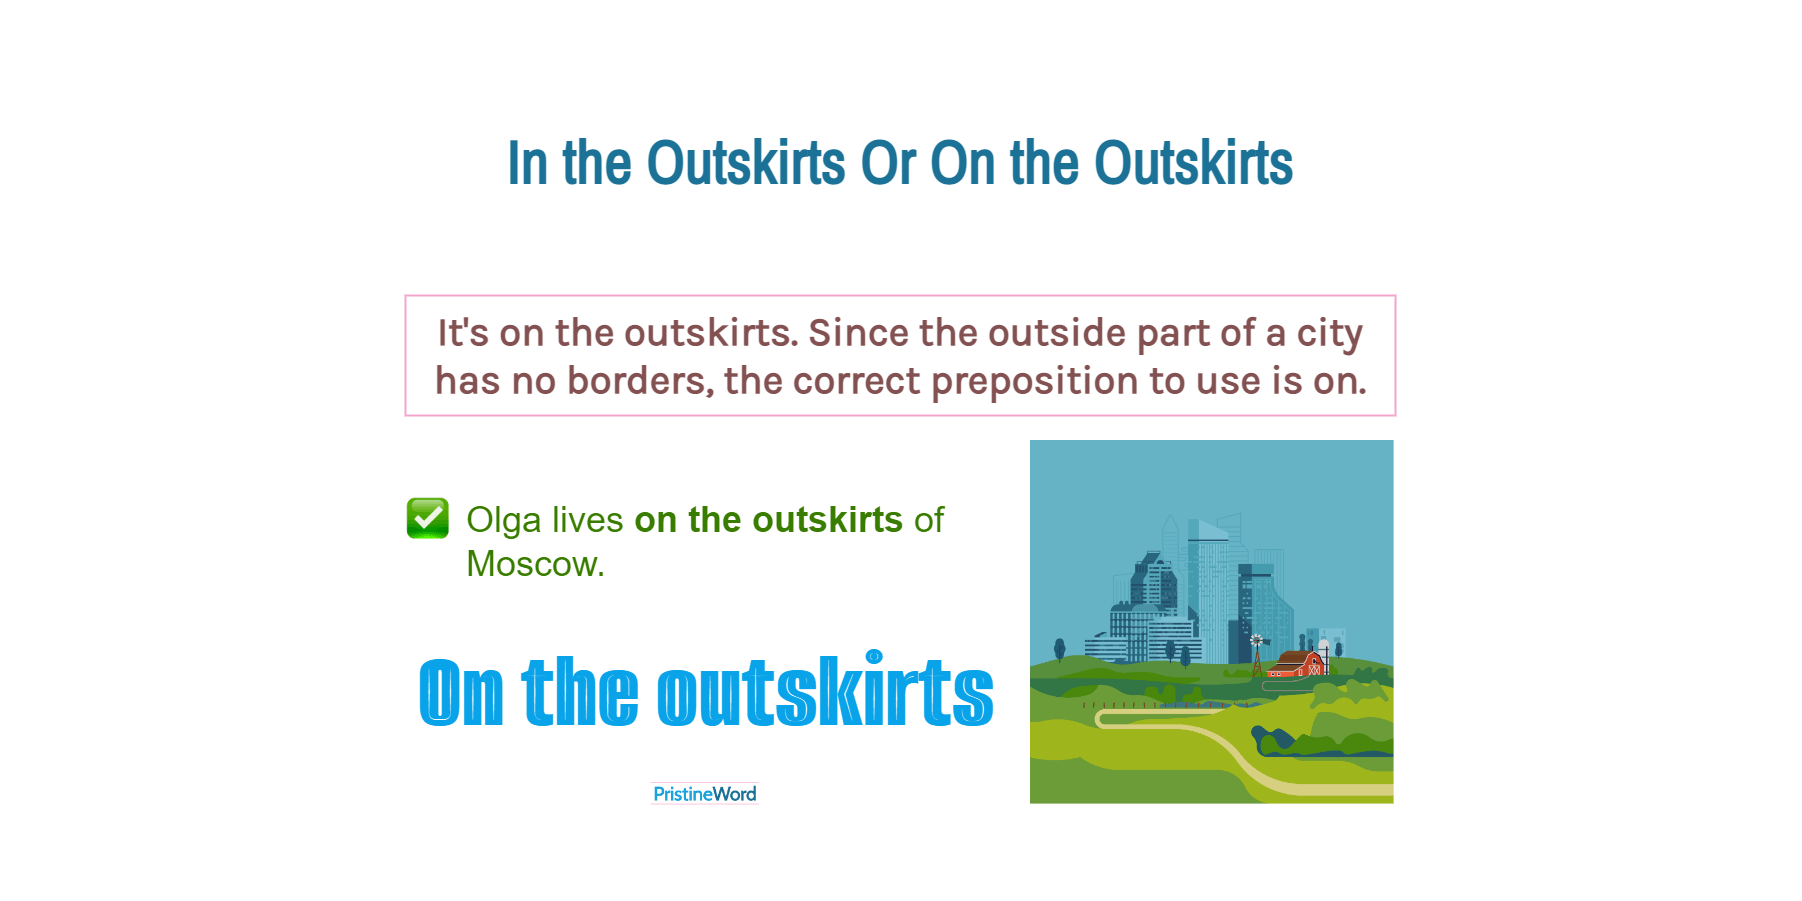 'On the Outskirts' Or 'In the Outskirts'